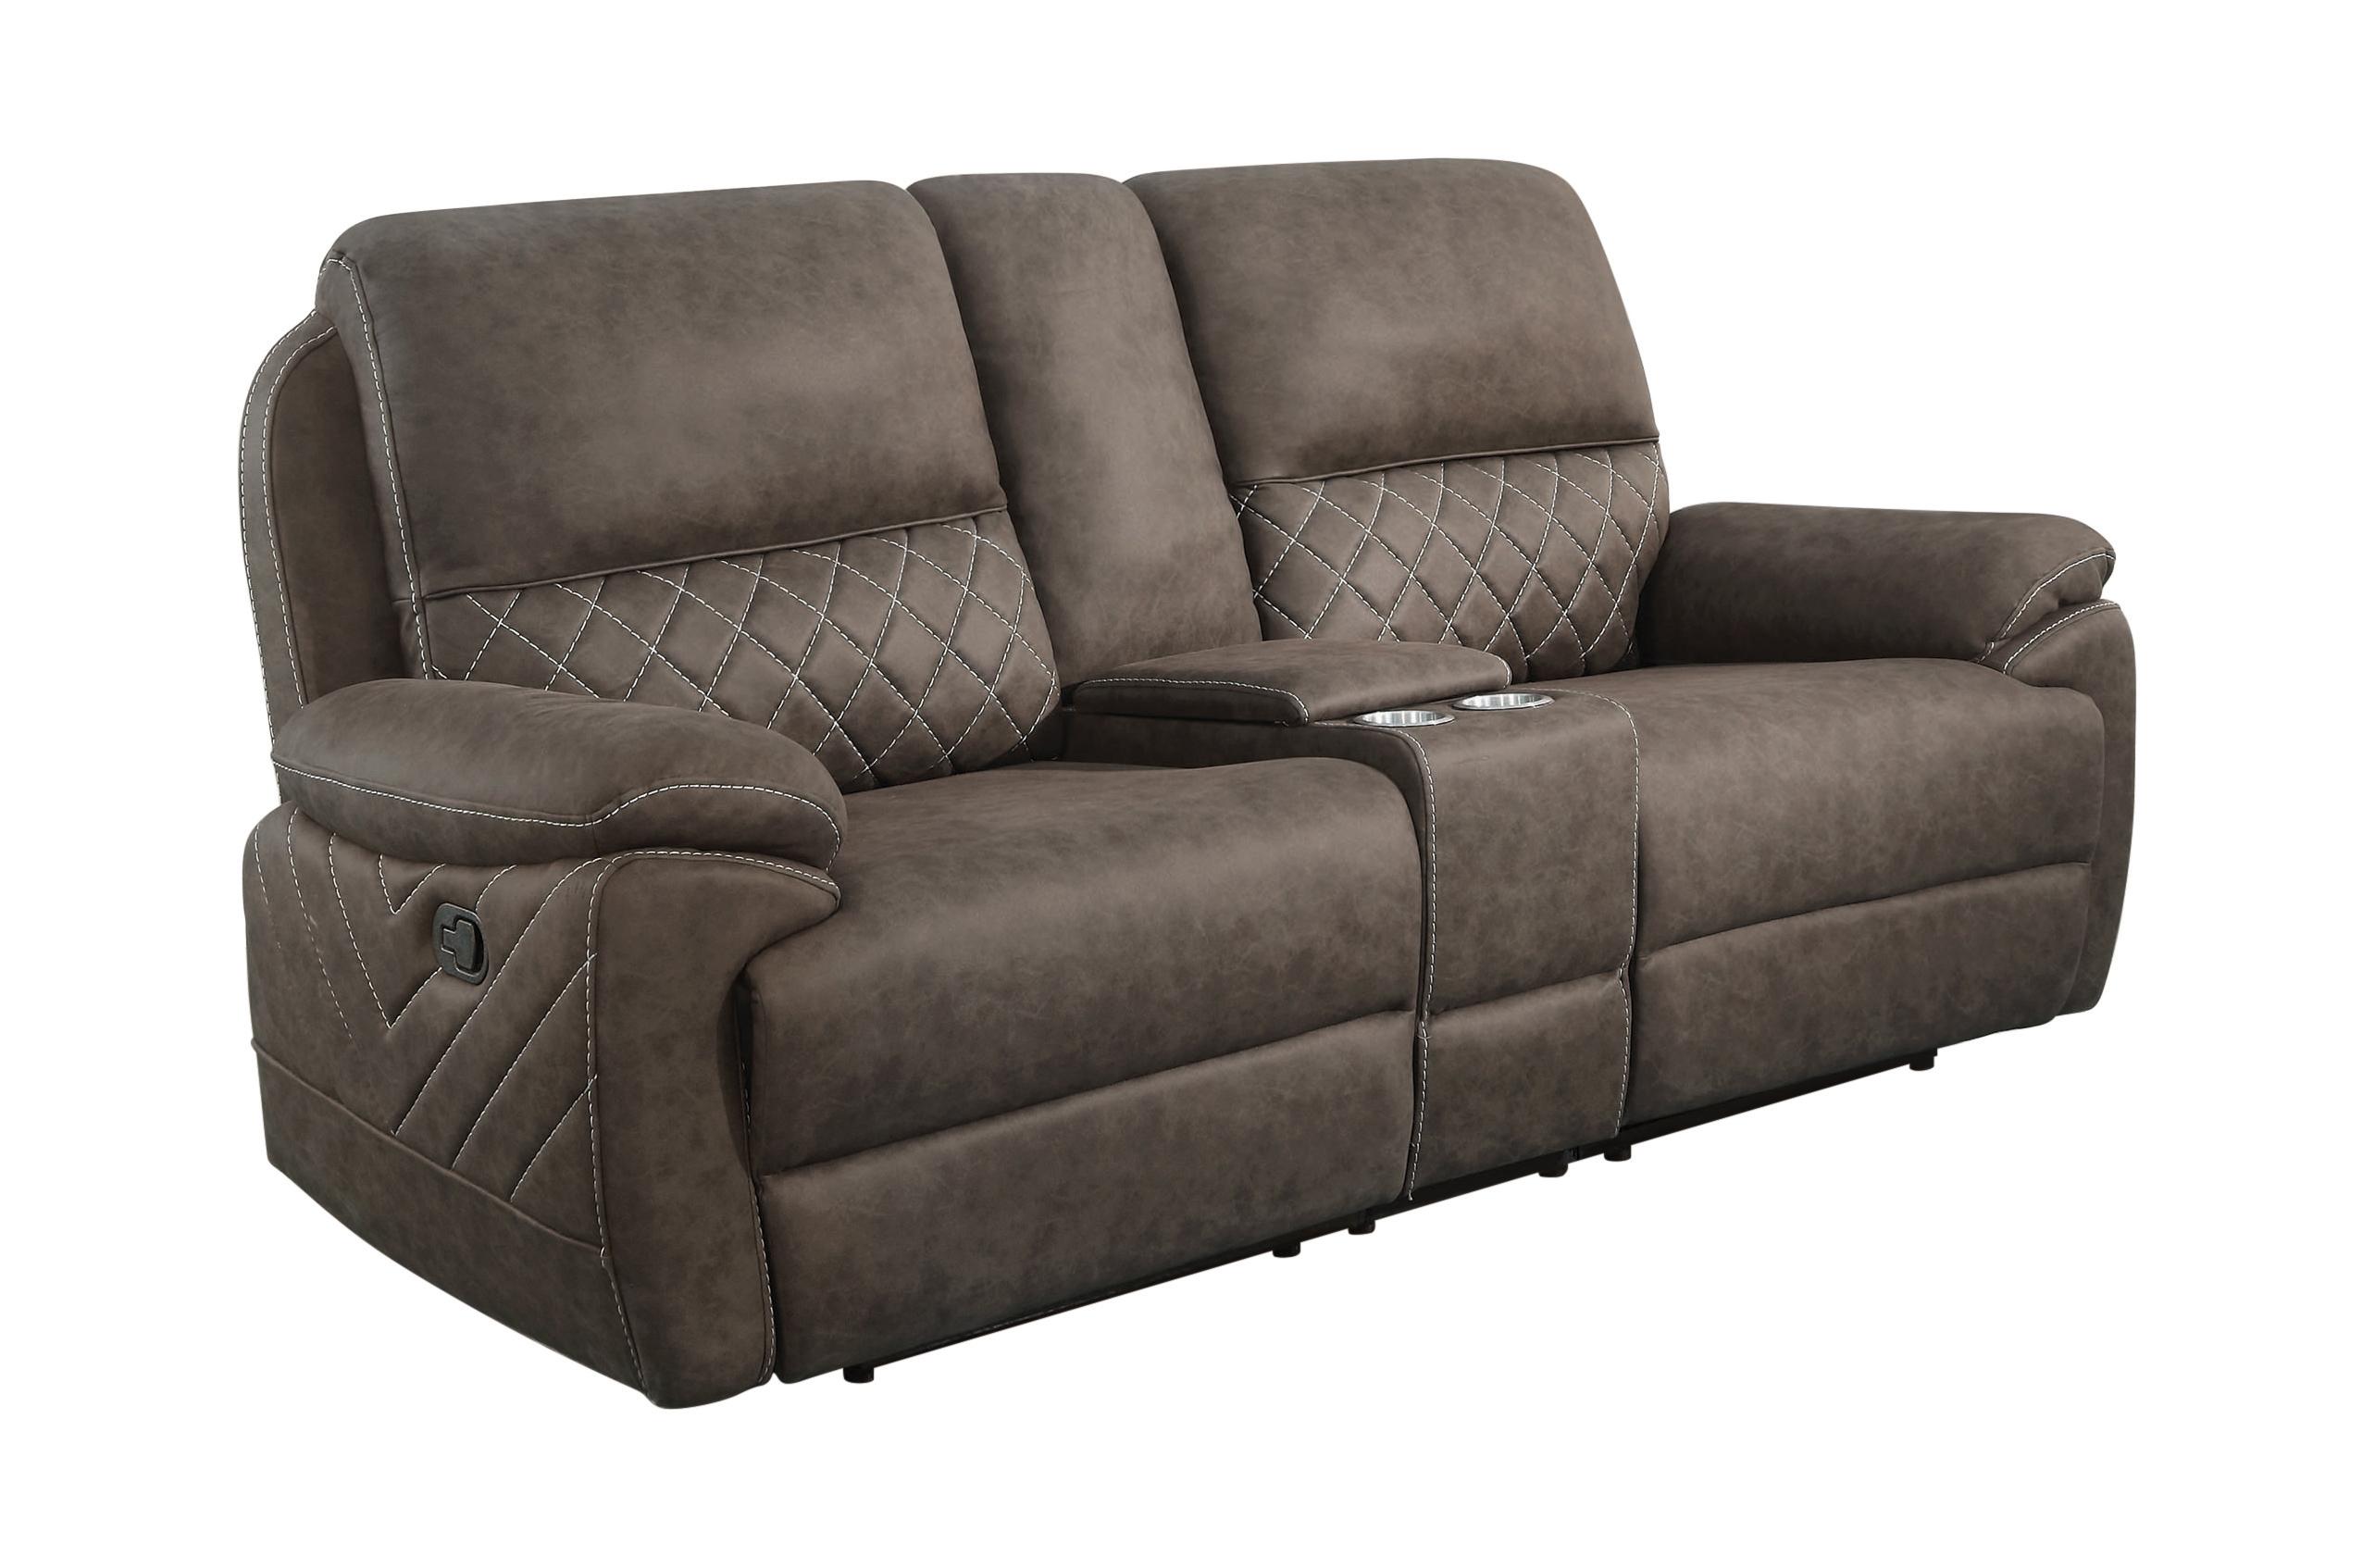 Transitional Motion Sofa 608982 Variel 608982 in Taupe 